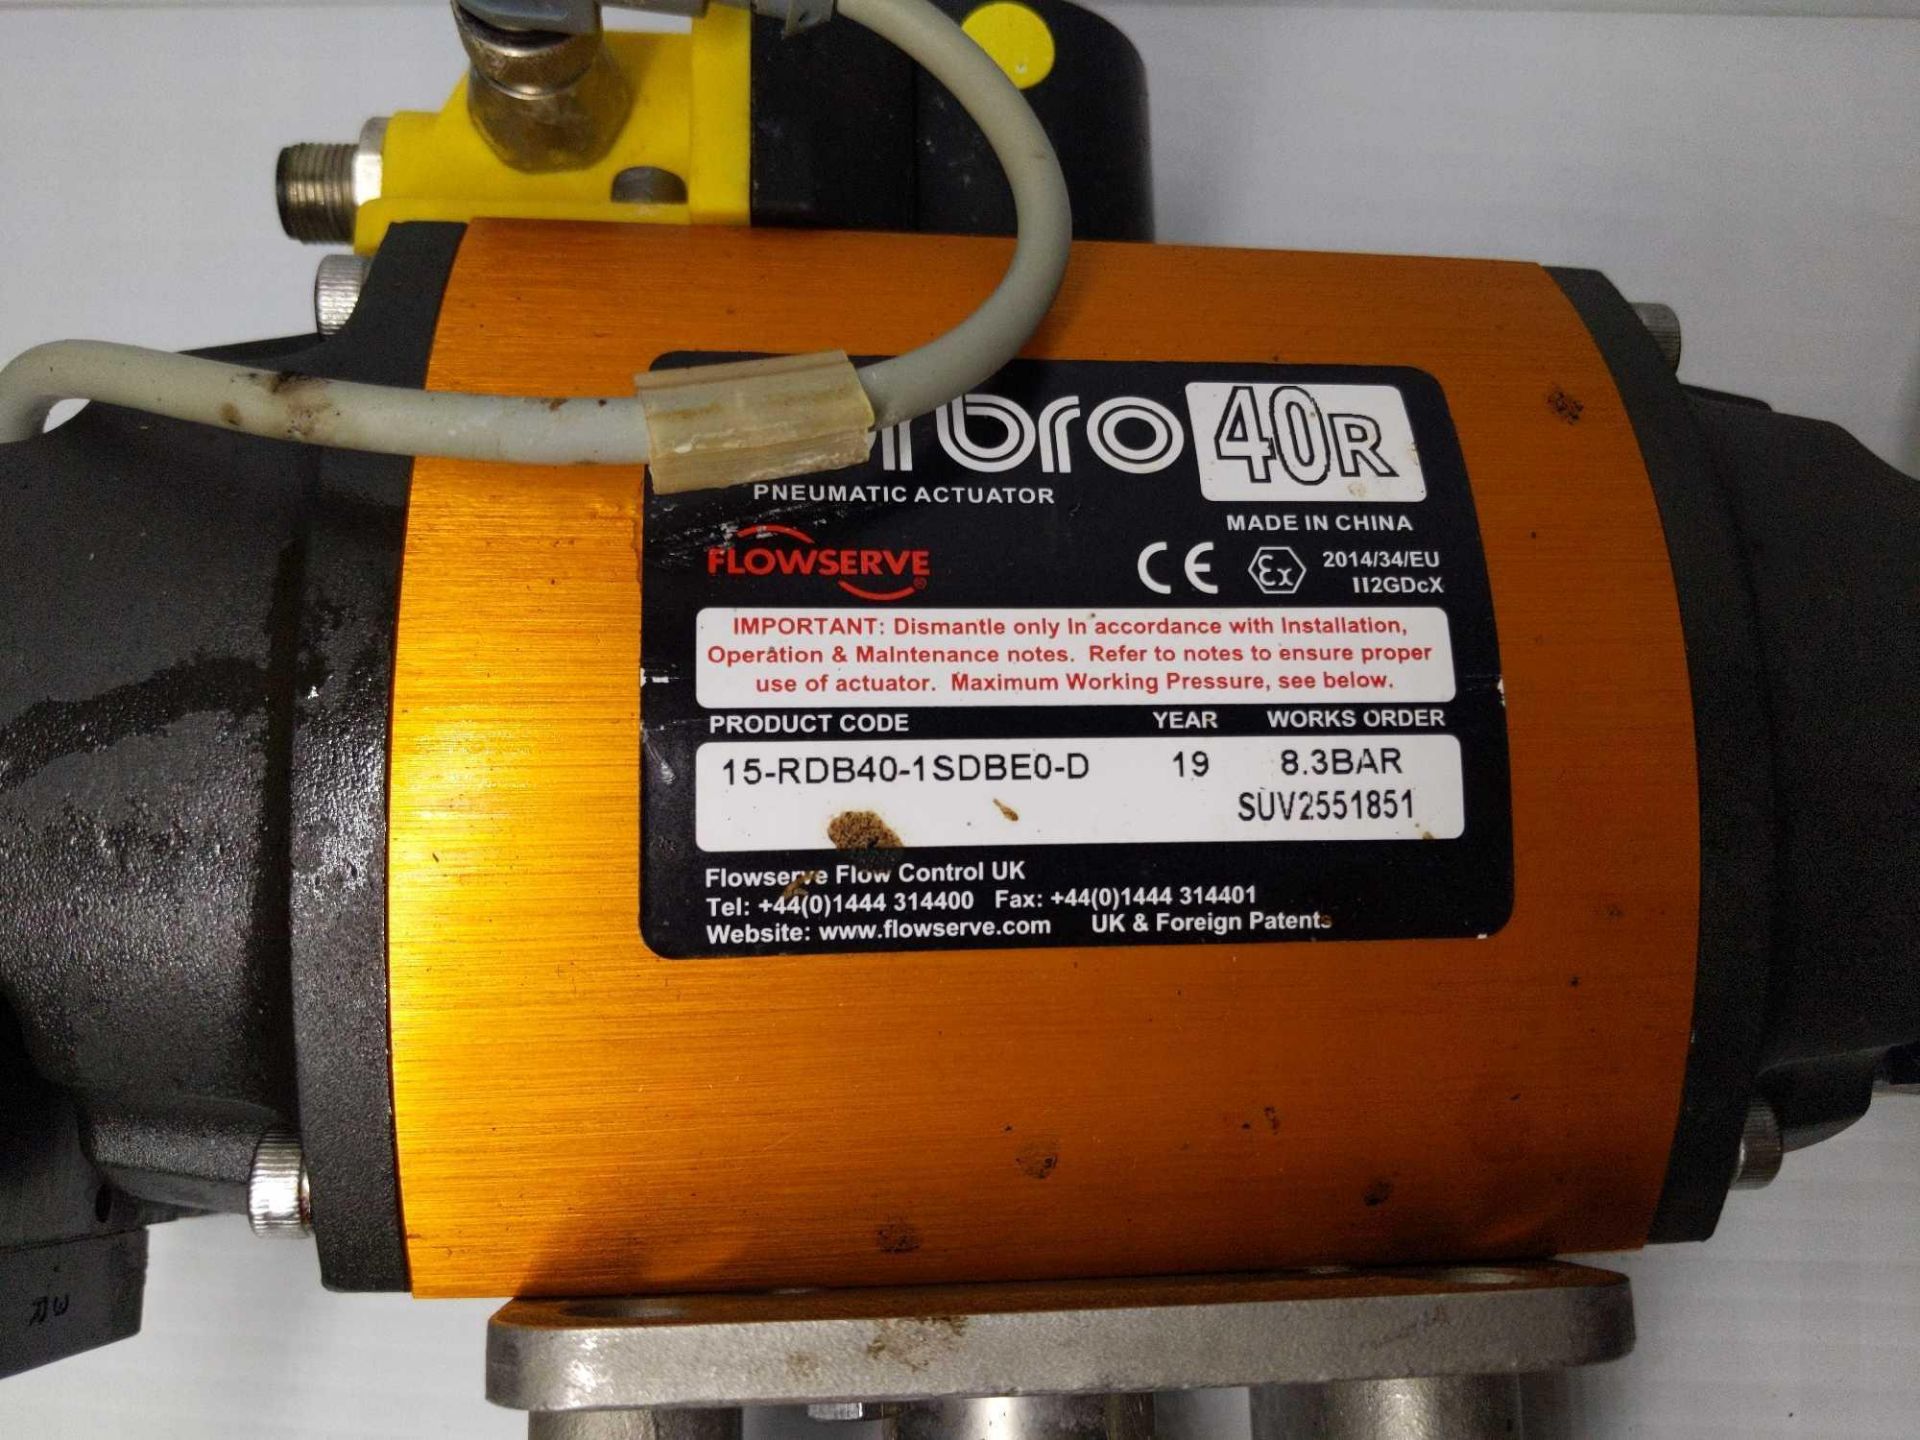 (5) Used Norbro Pneumatic Actuator 40R - Image 3 of 5